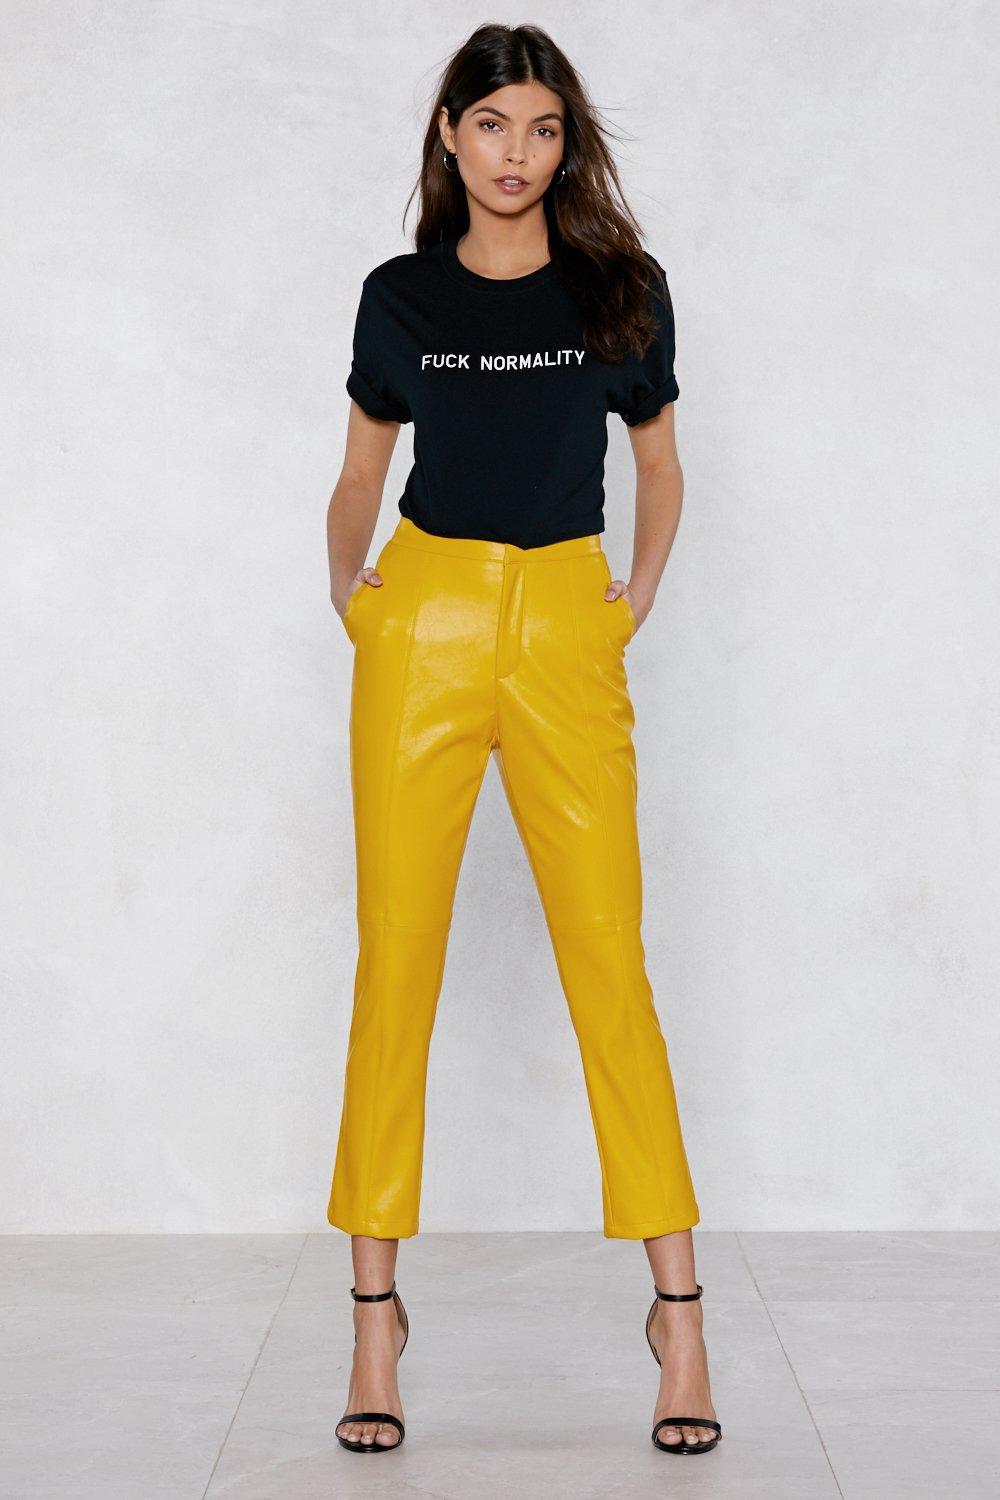 yellow leather trousers